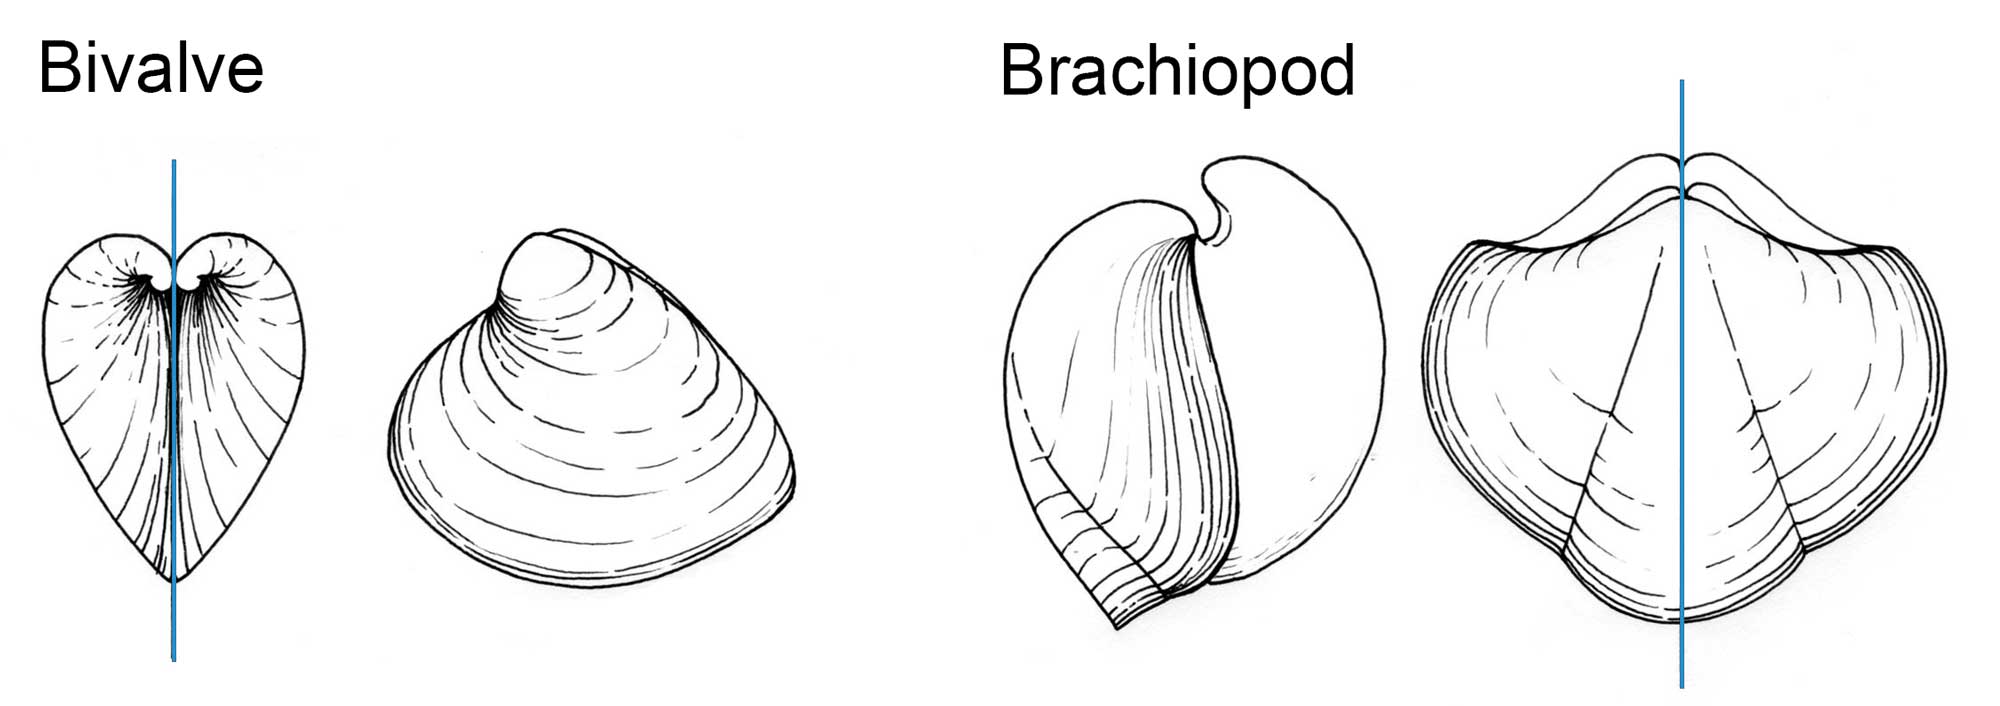 Illustrations that show how the symmetry of a bivalve shell differs from that of a brachiopod shell.